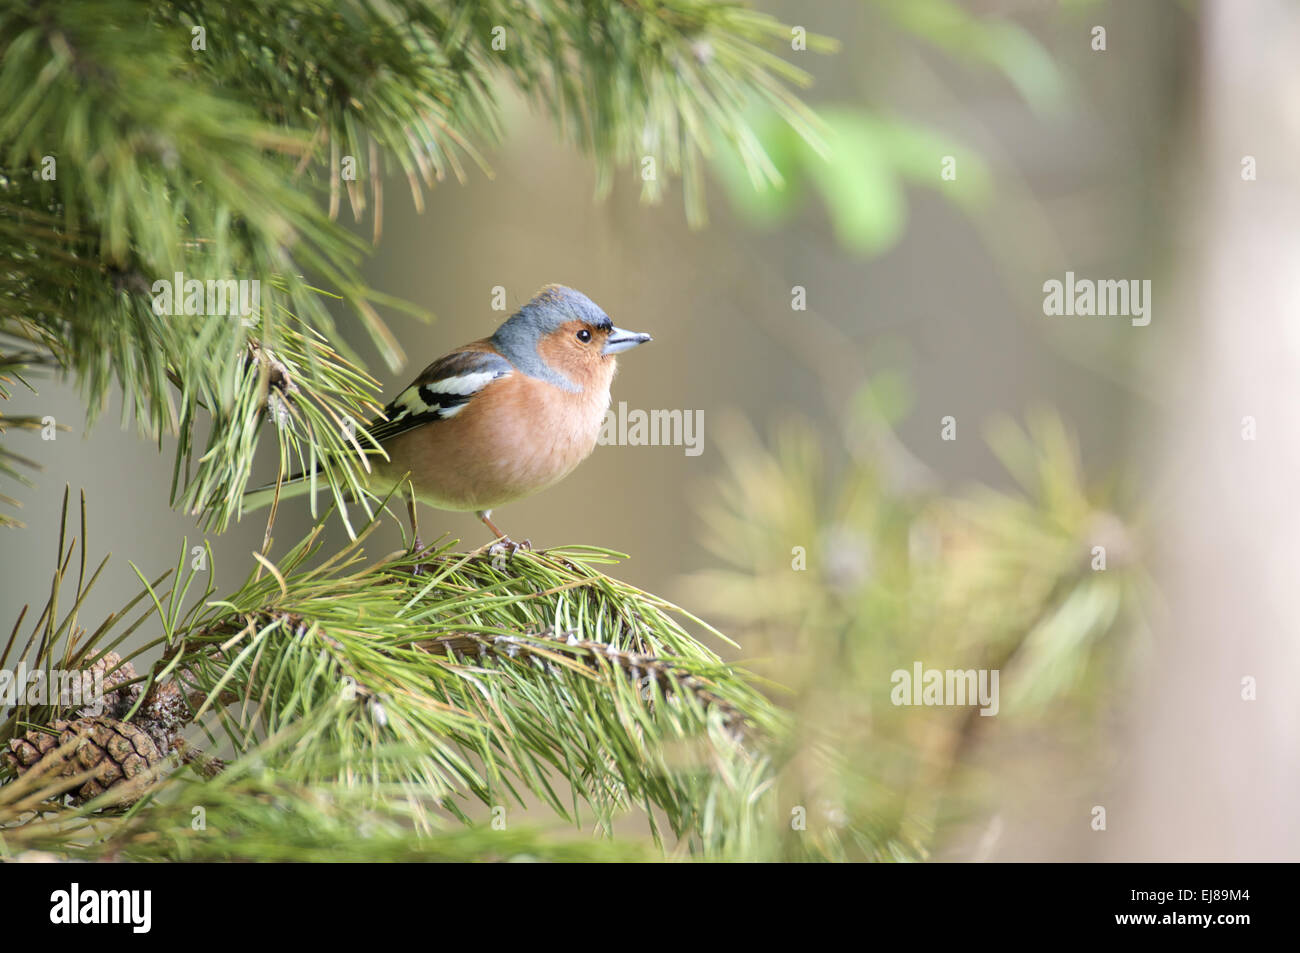 Common Chaffinch Banque D'Images